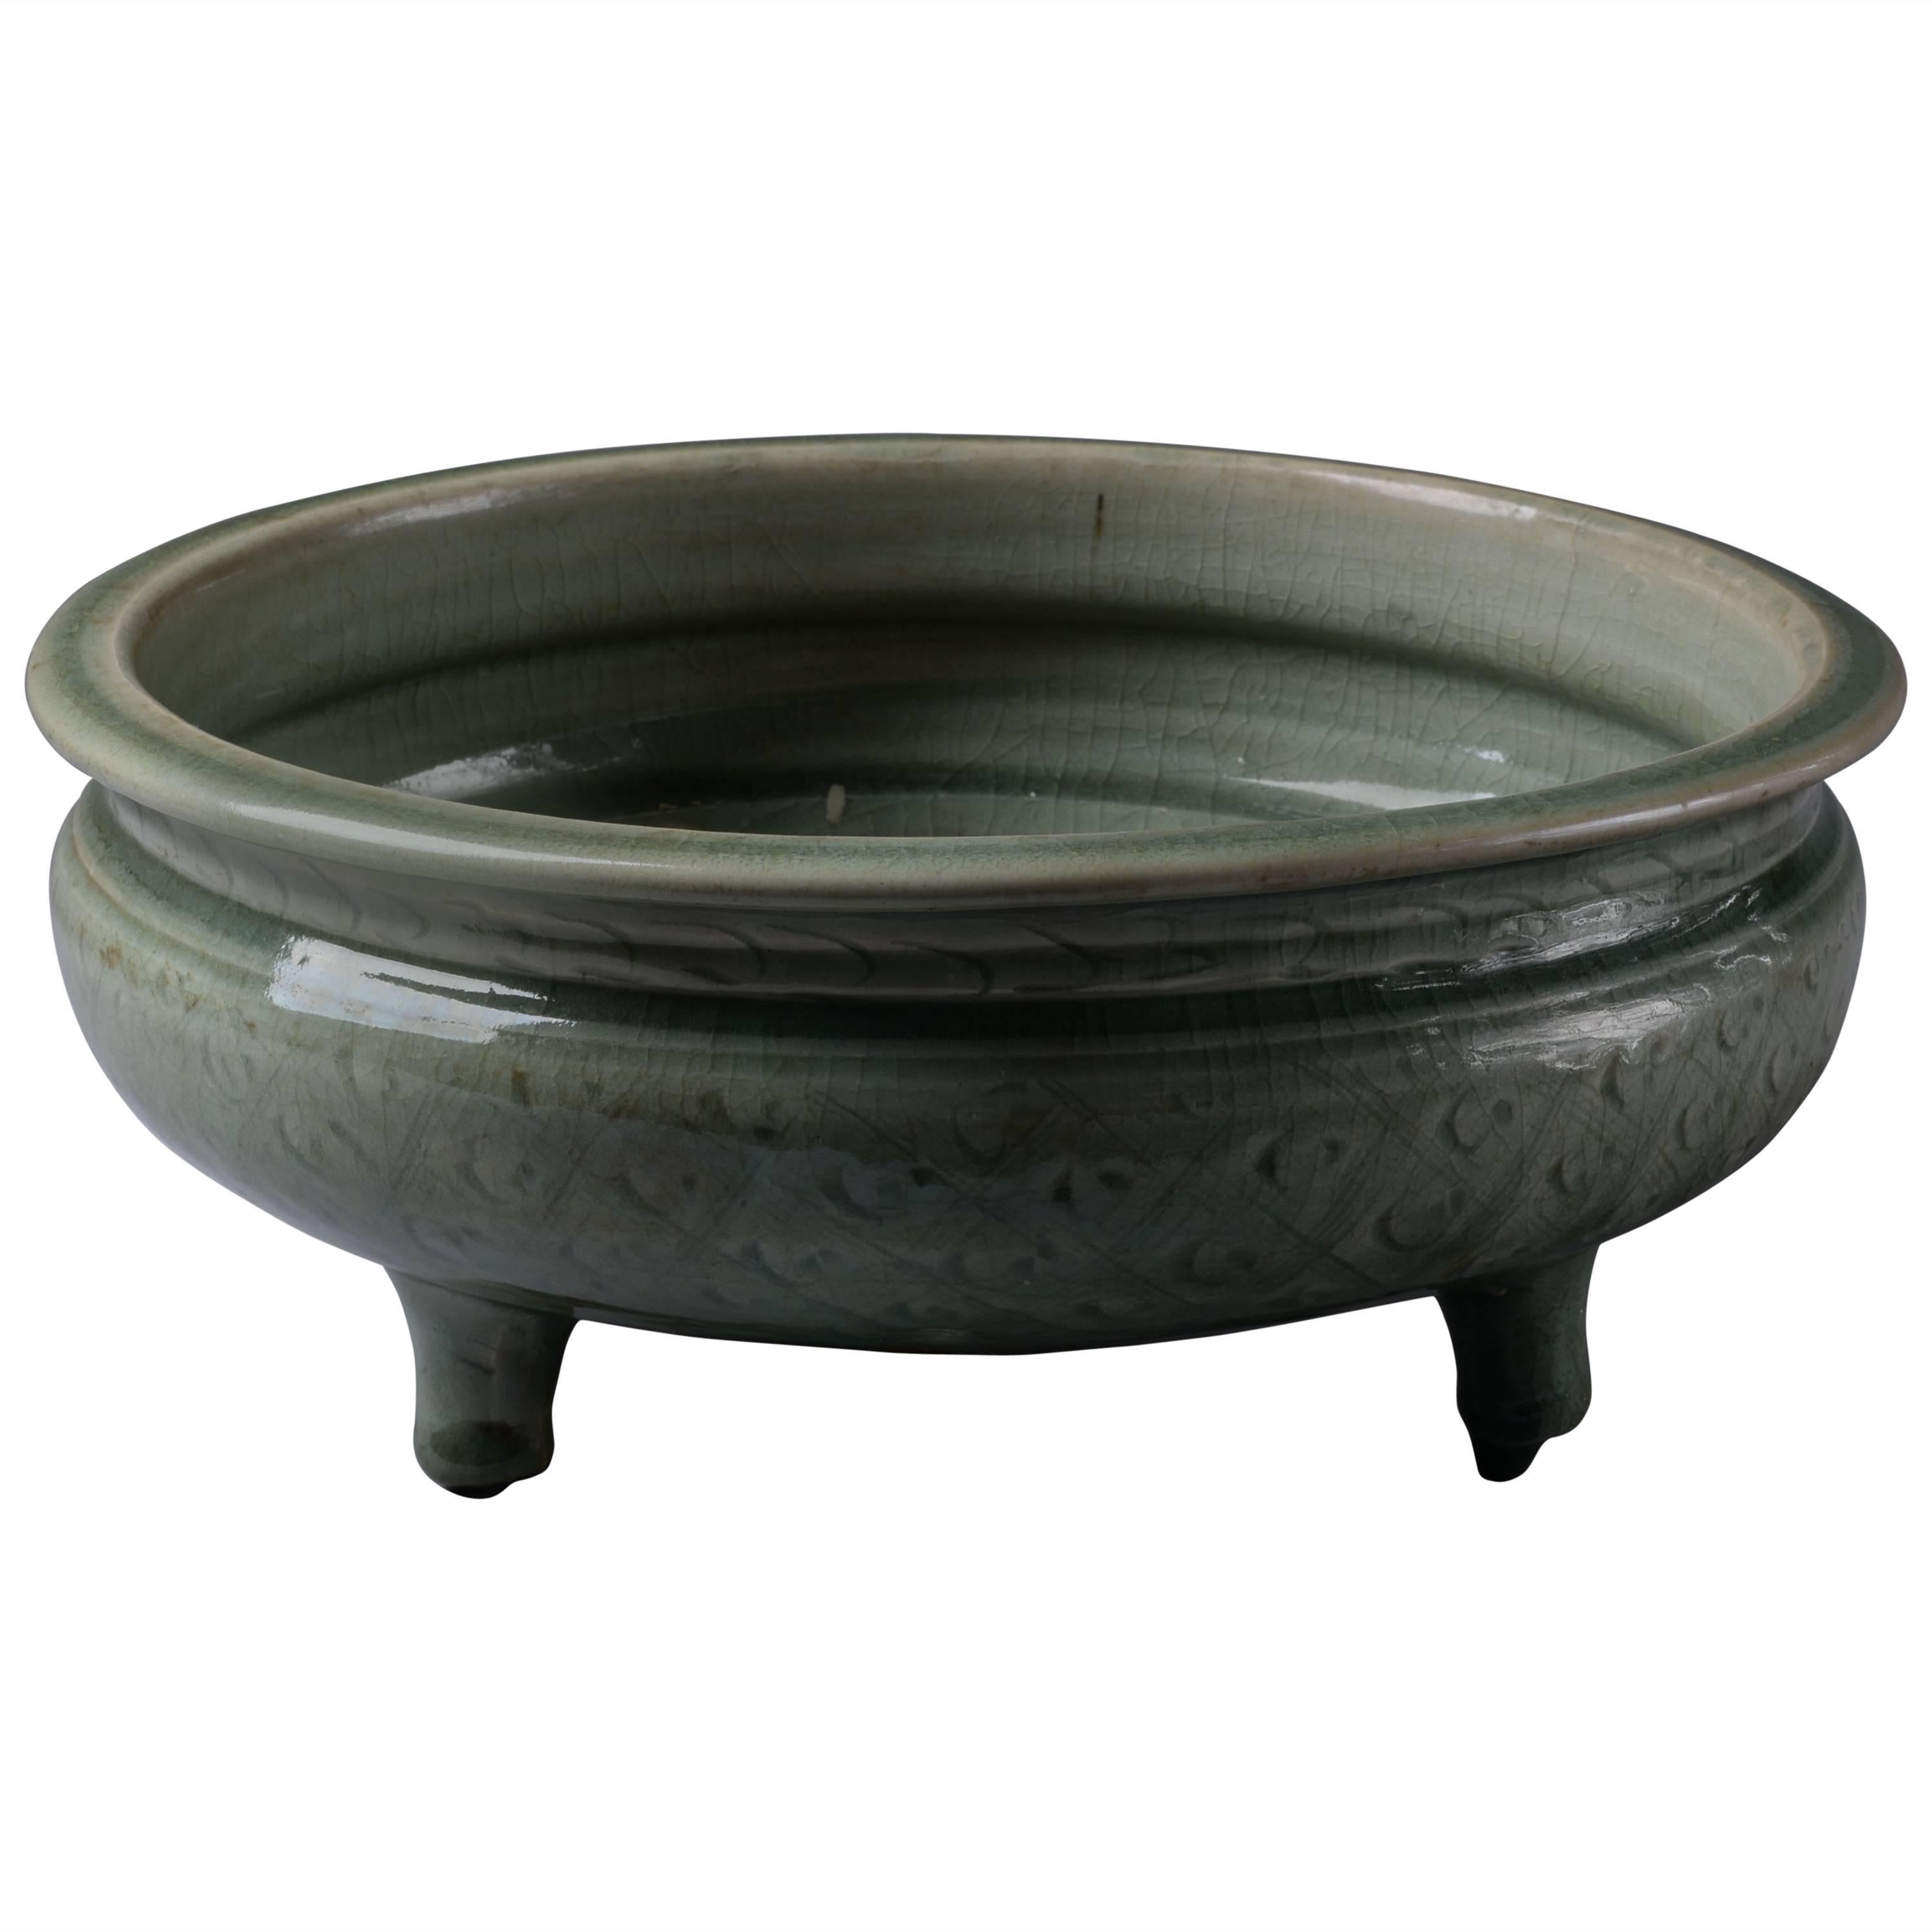 Chinese Ming Dynasty Longquan Tripod Censer, 15th Century